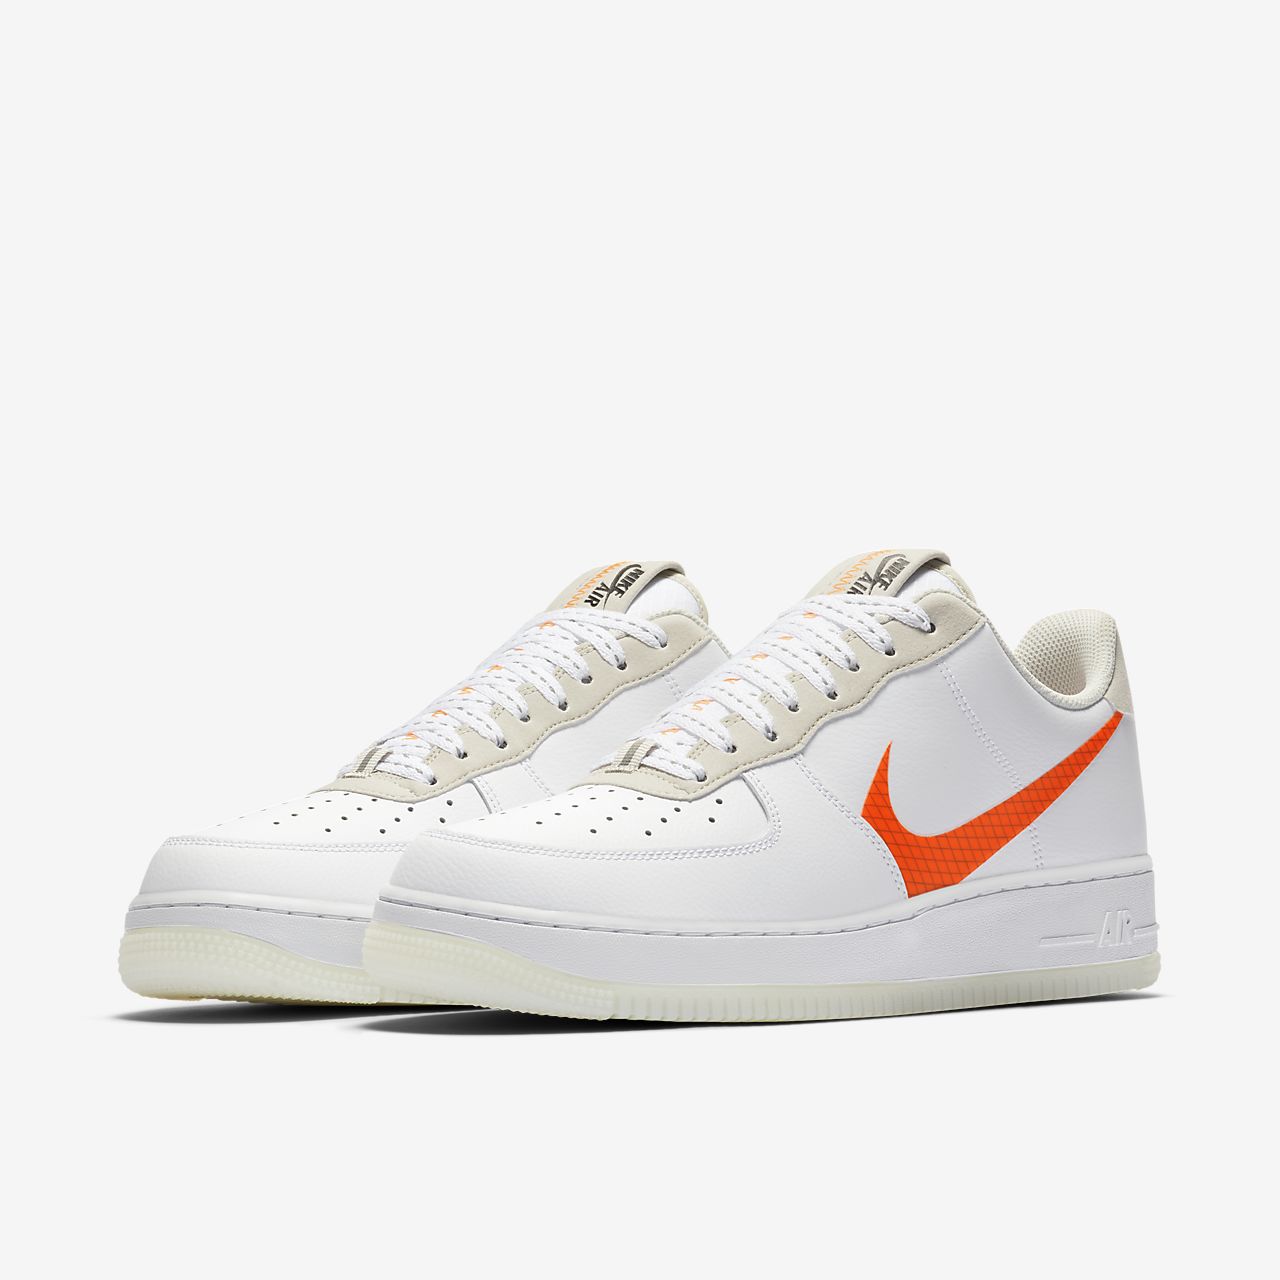 NIKE Official]Nike Air Force 1 '07 LV8 